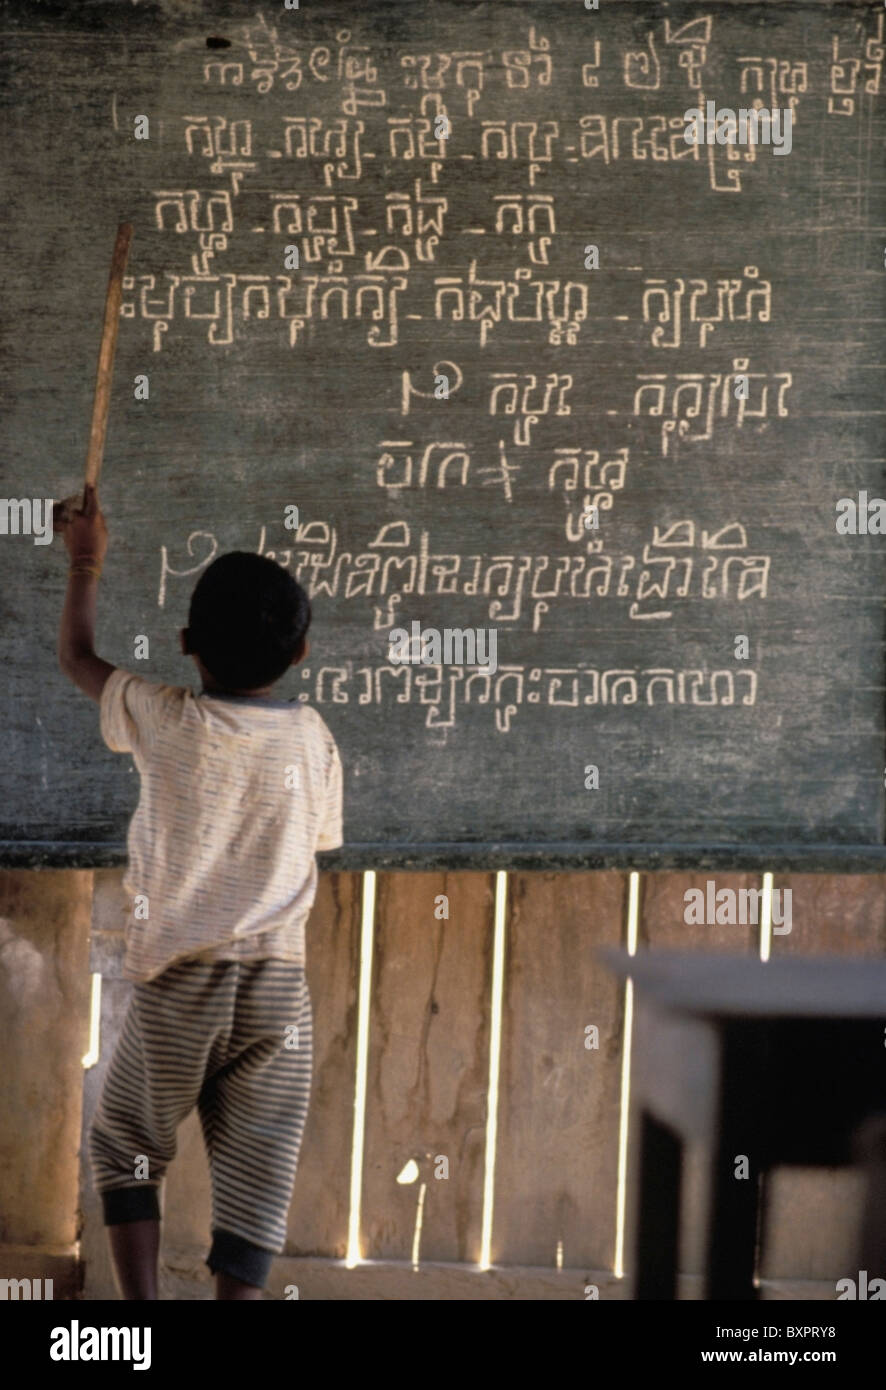 Boy Pointing At Writing On A Blackboard In A Rural School Stock Photo